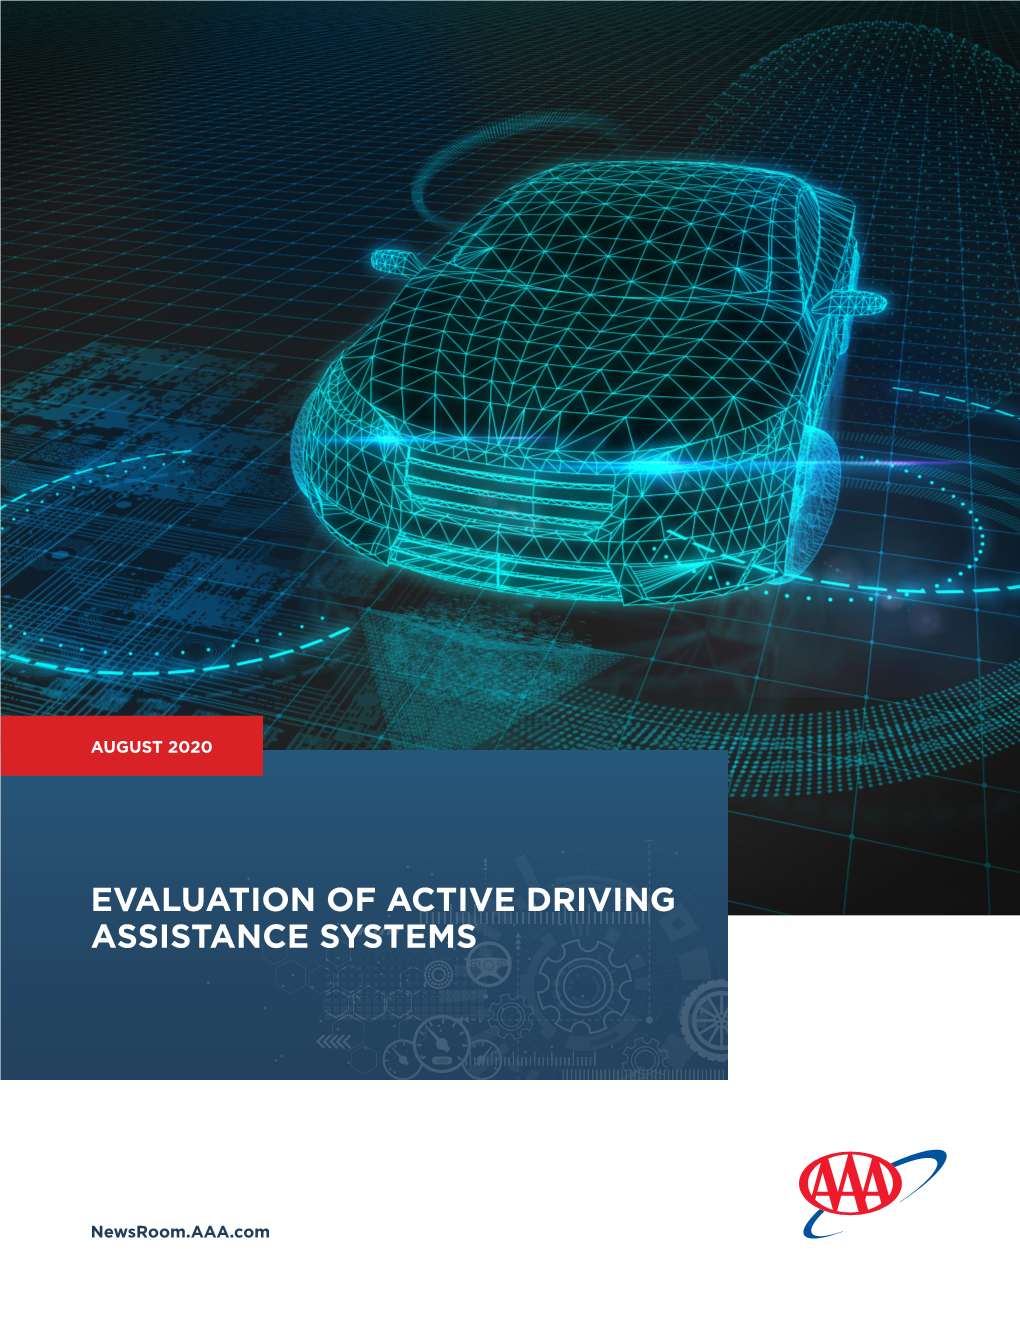 Evaluation of Active Driving Assistance Systems